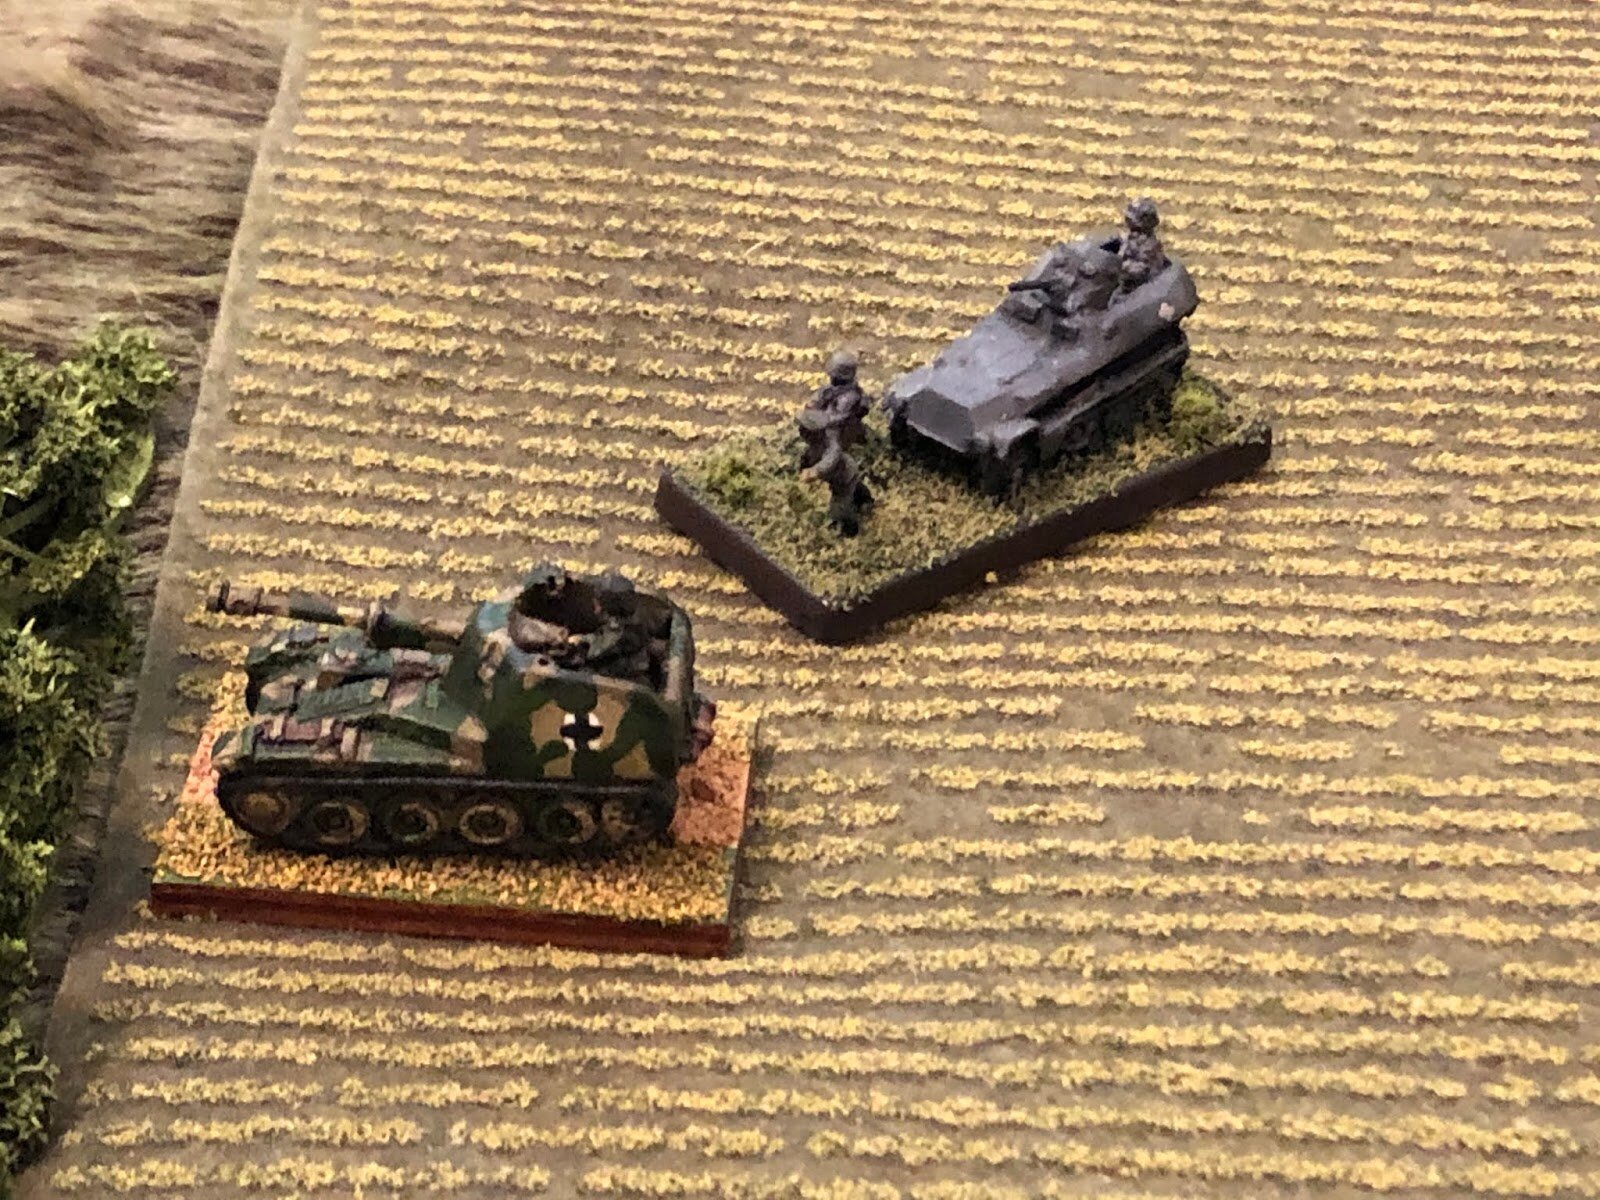  Back in the north, the German CO, who's been rather lethargic, moves up and orders the Marder crew to quit screwing around and engage the Soviet tanks! 